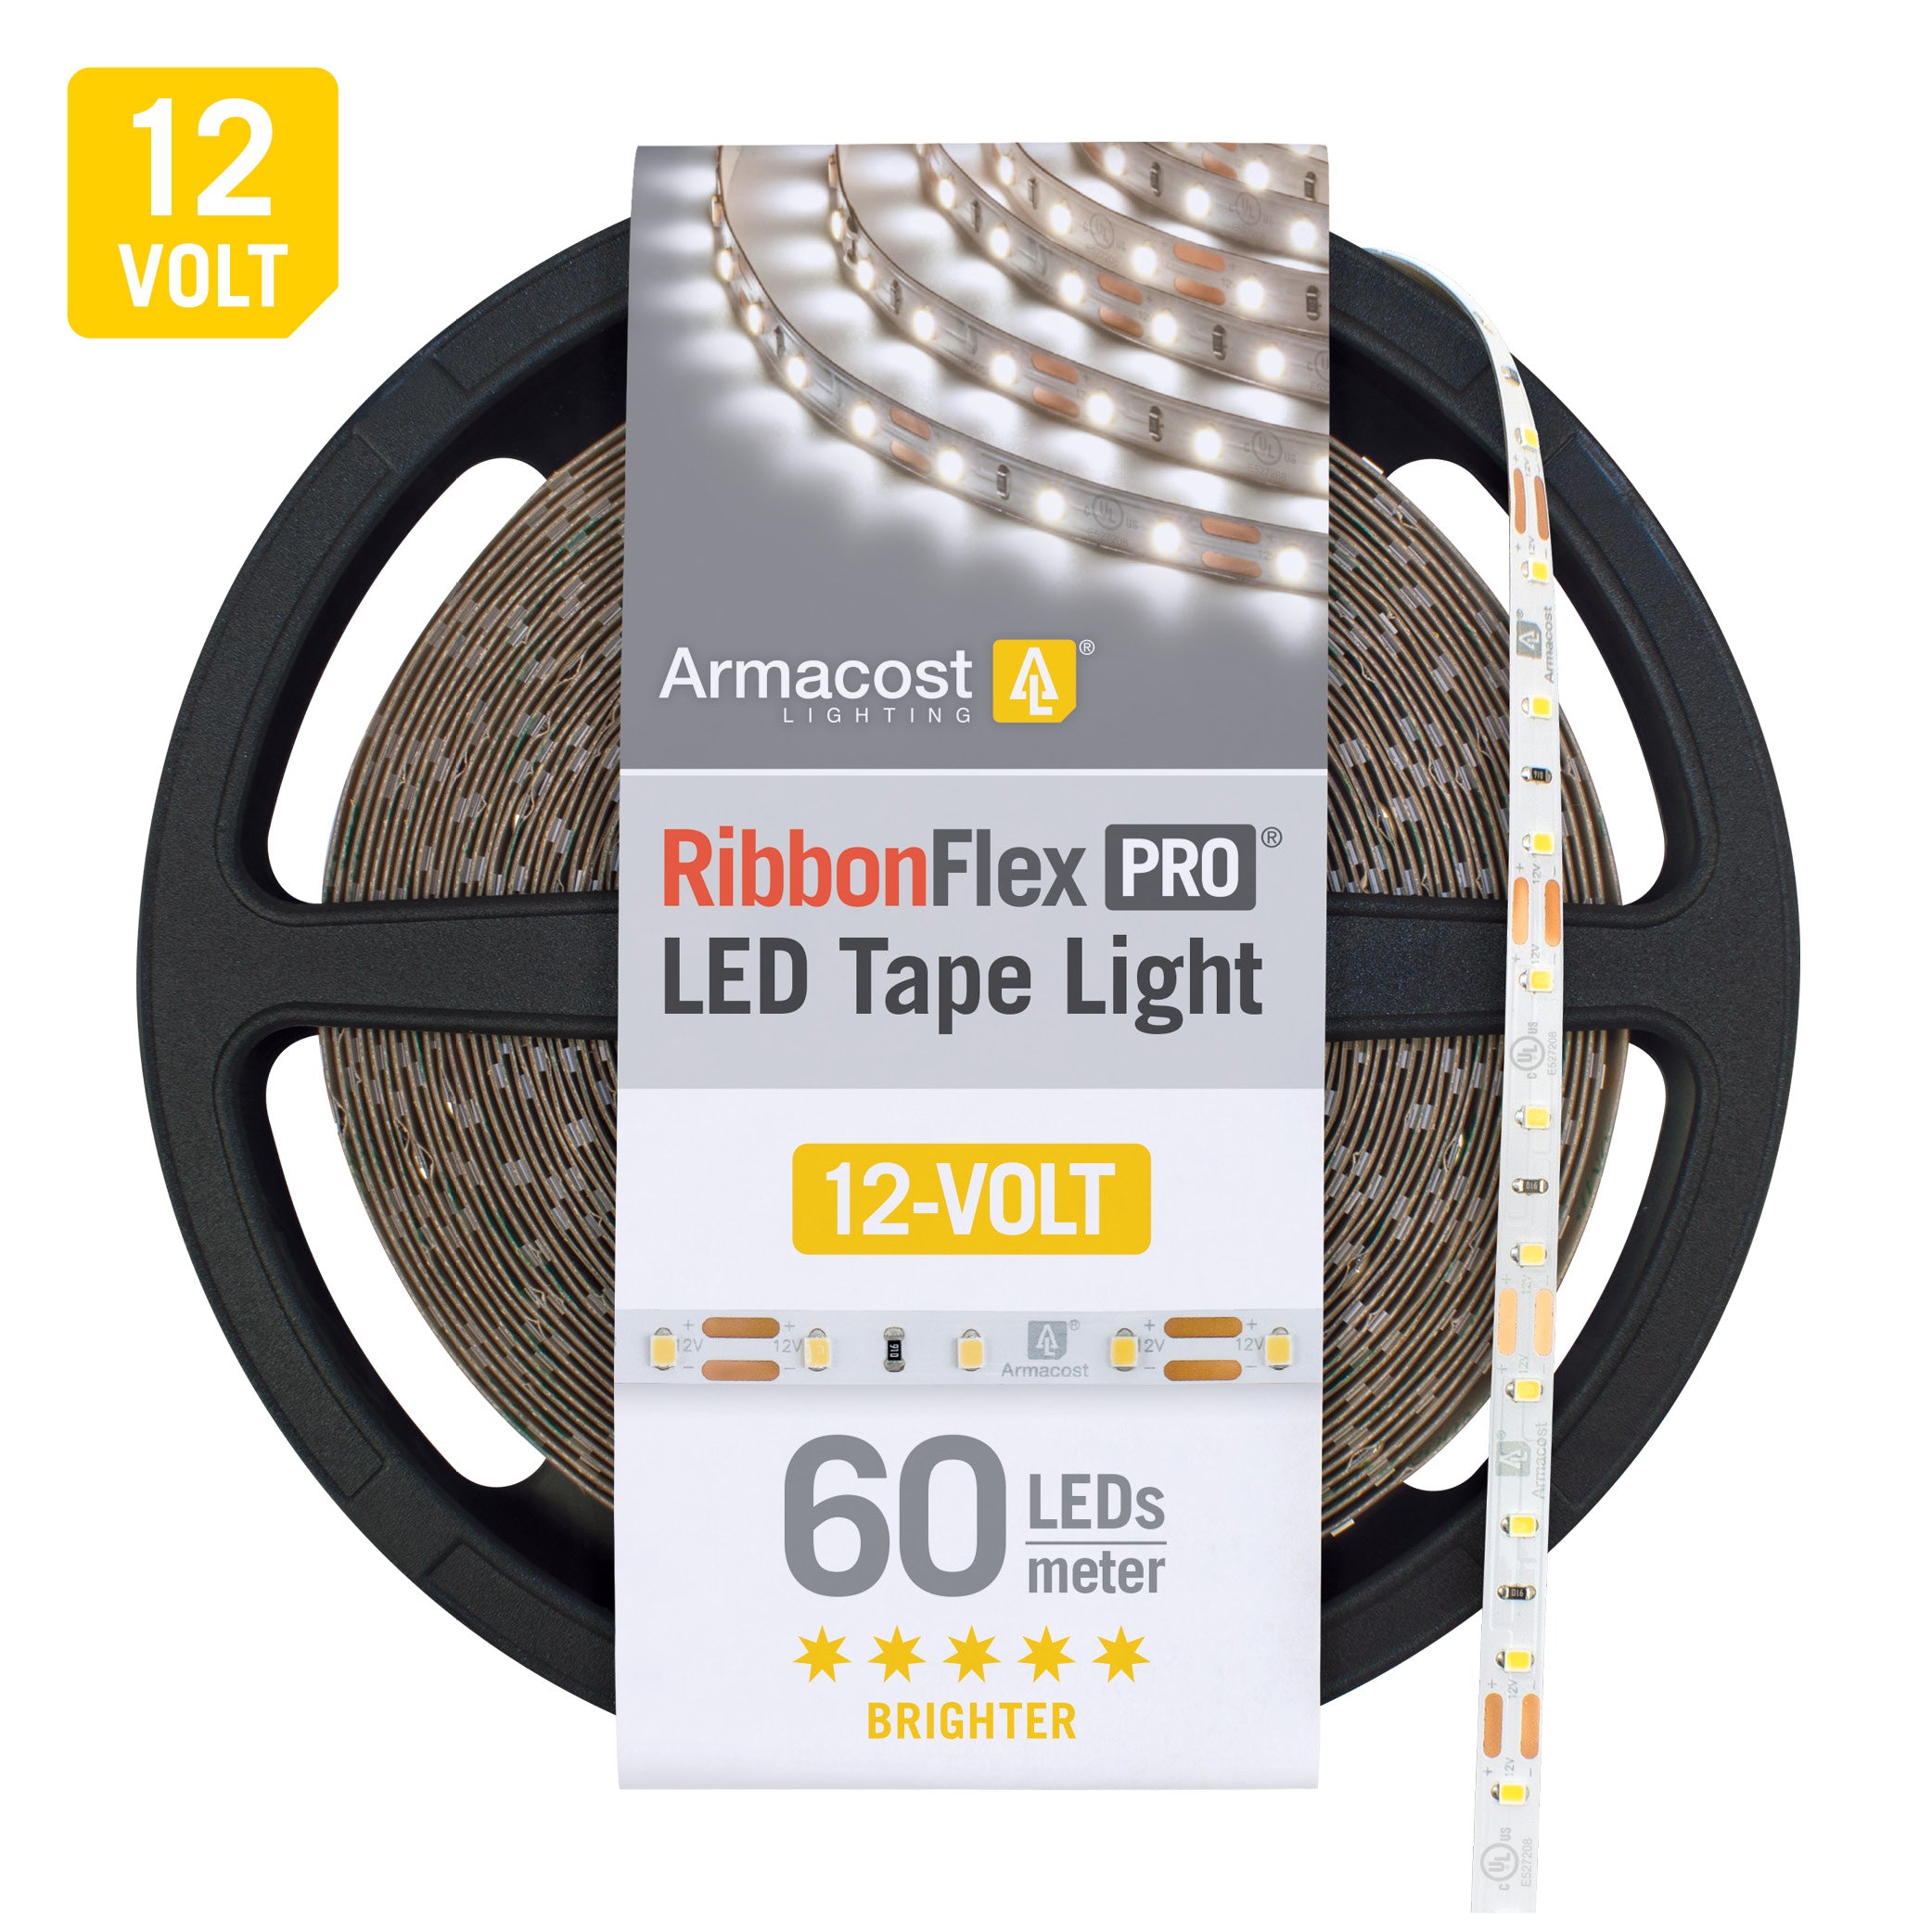 Armacost Lighting LED Lights and Accessories